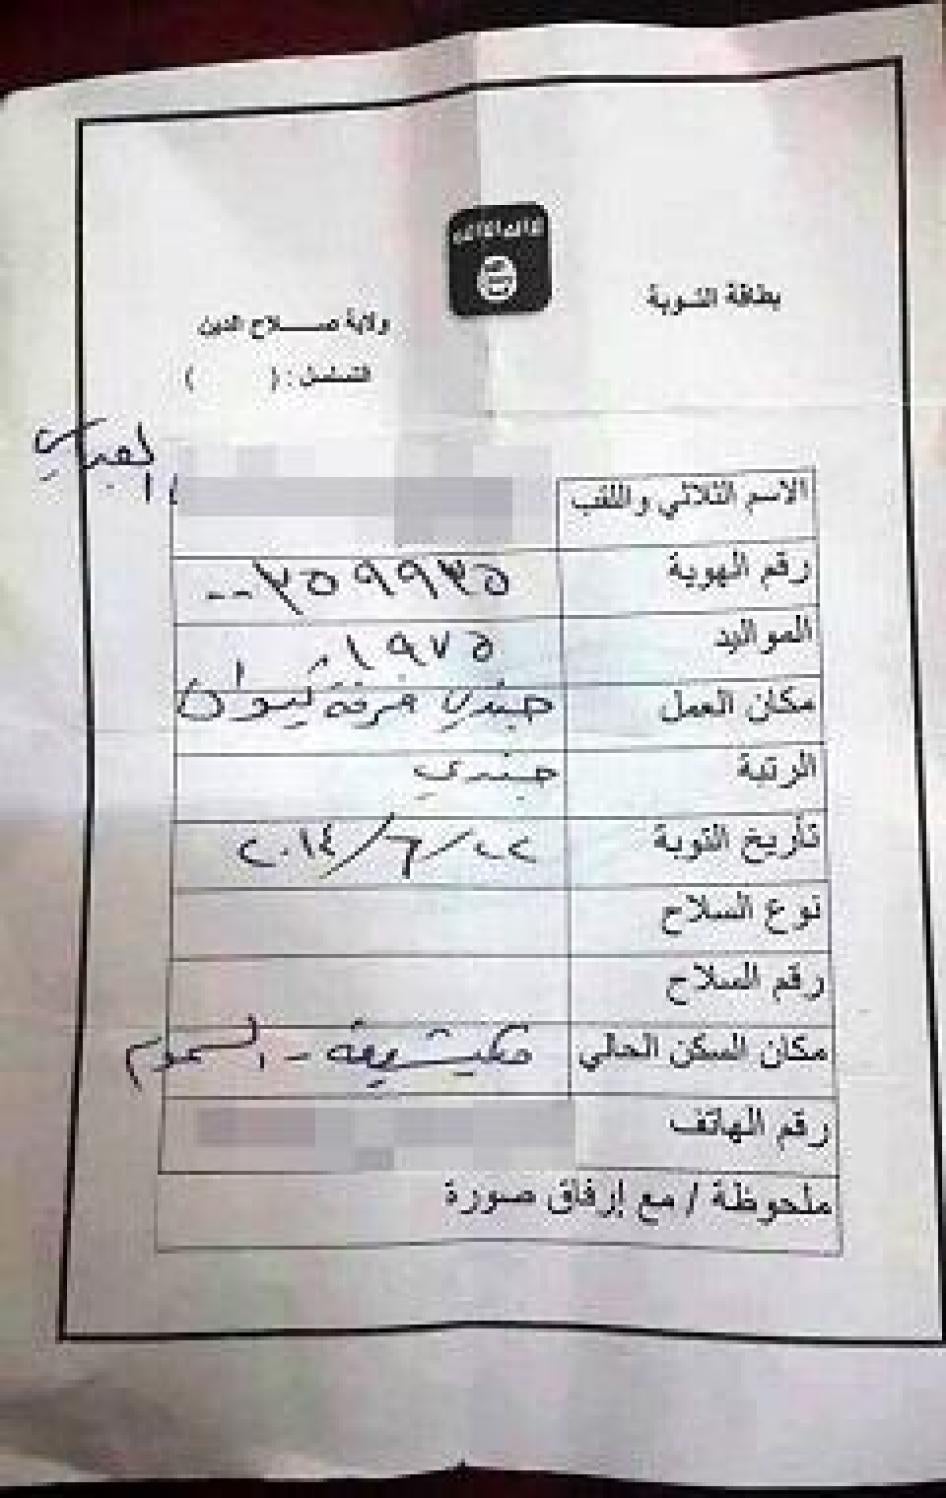 "Certificate of Repentance," issued by ISIS's Salah al-Din Emirate